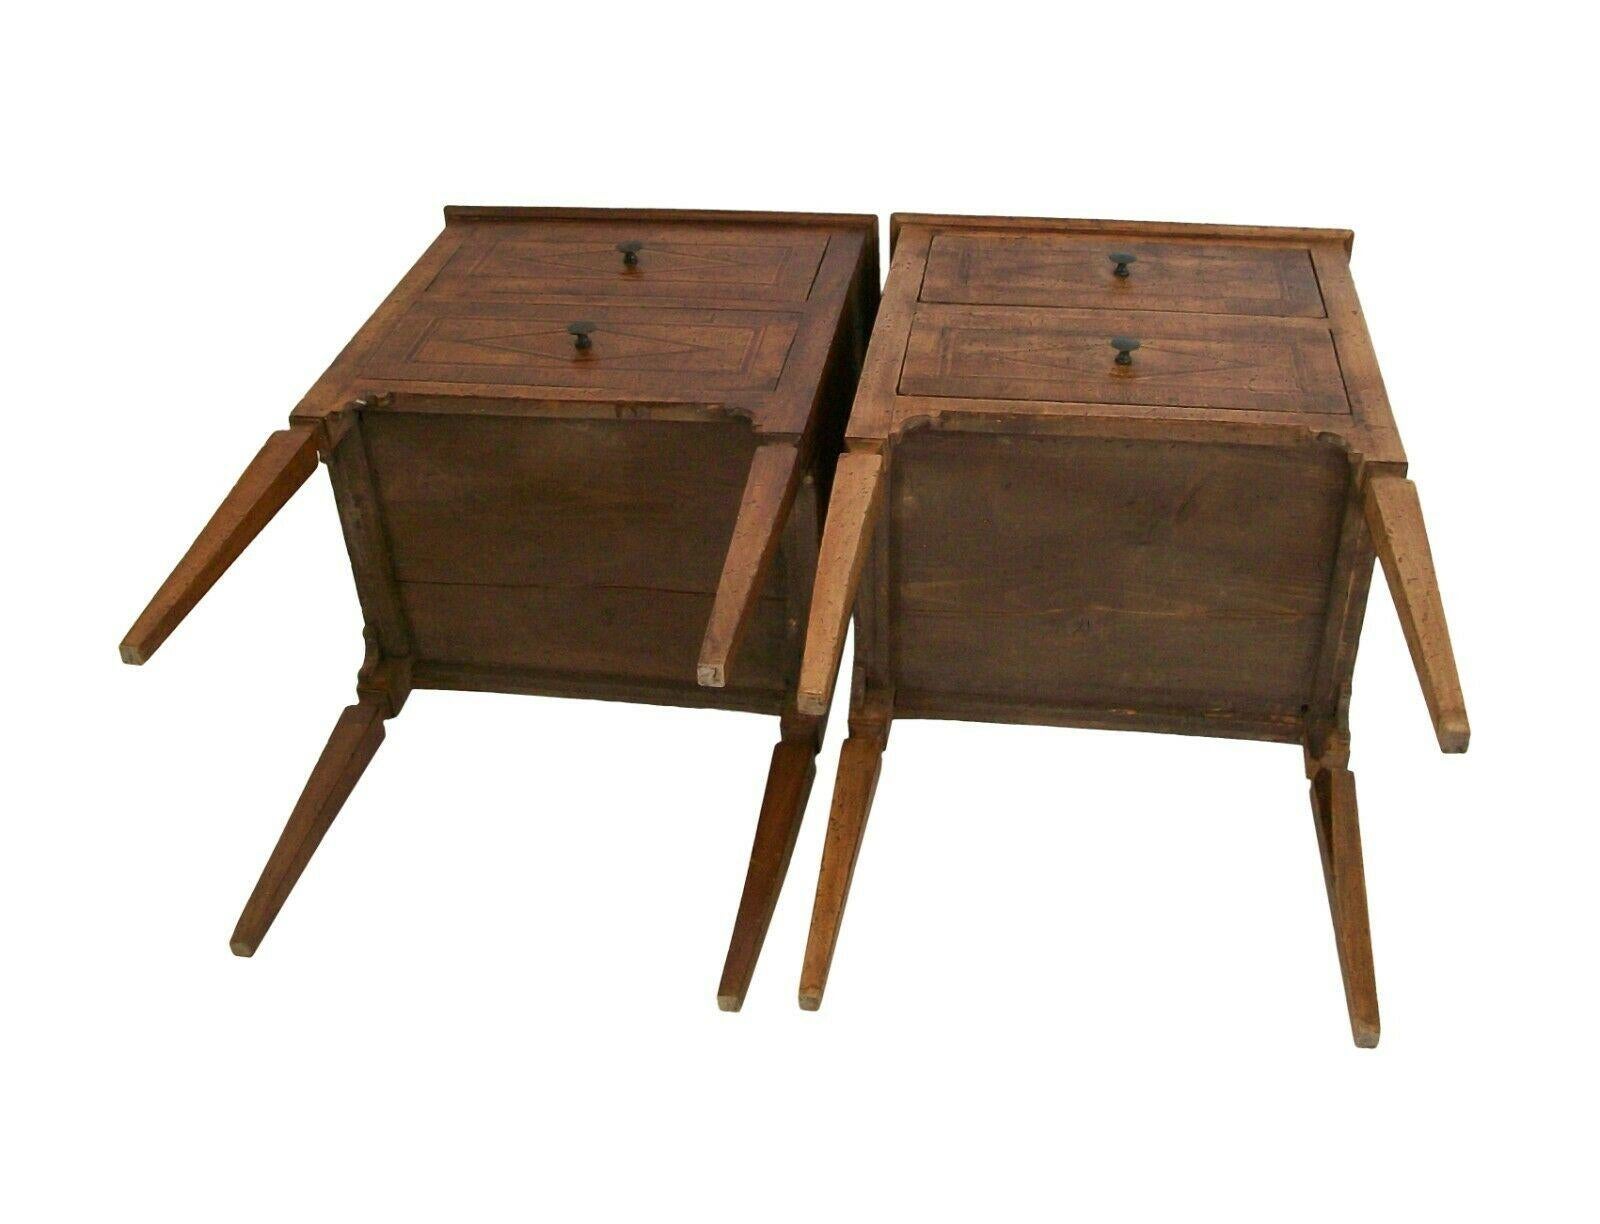 North Italian Antique Pair of Walnut Neoclassical Bedside Tables, Circa 1820 For Sale 2